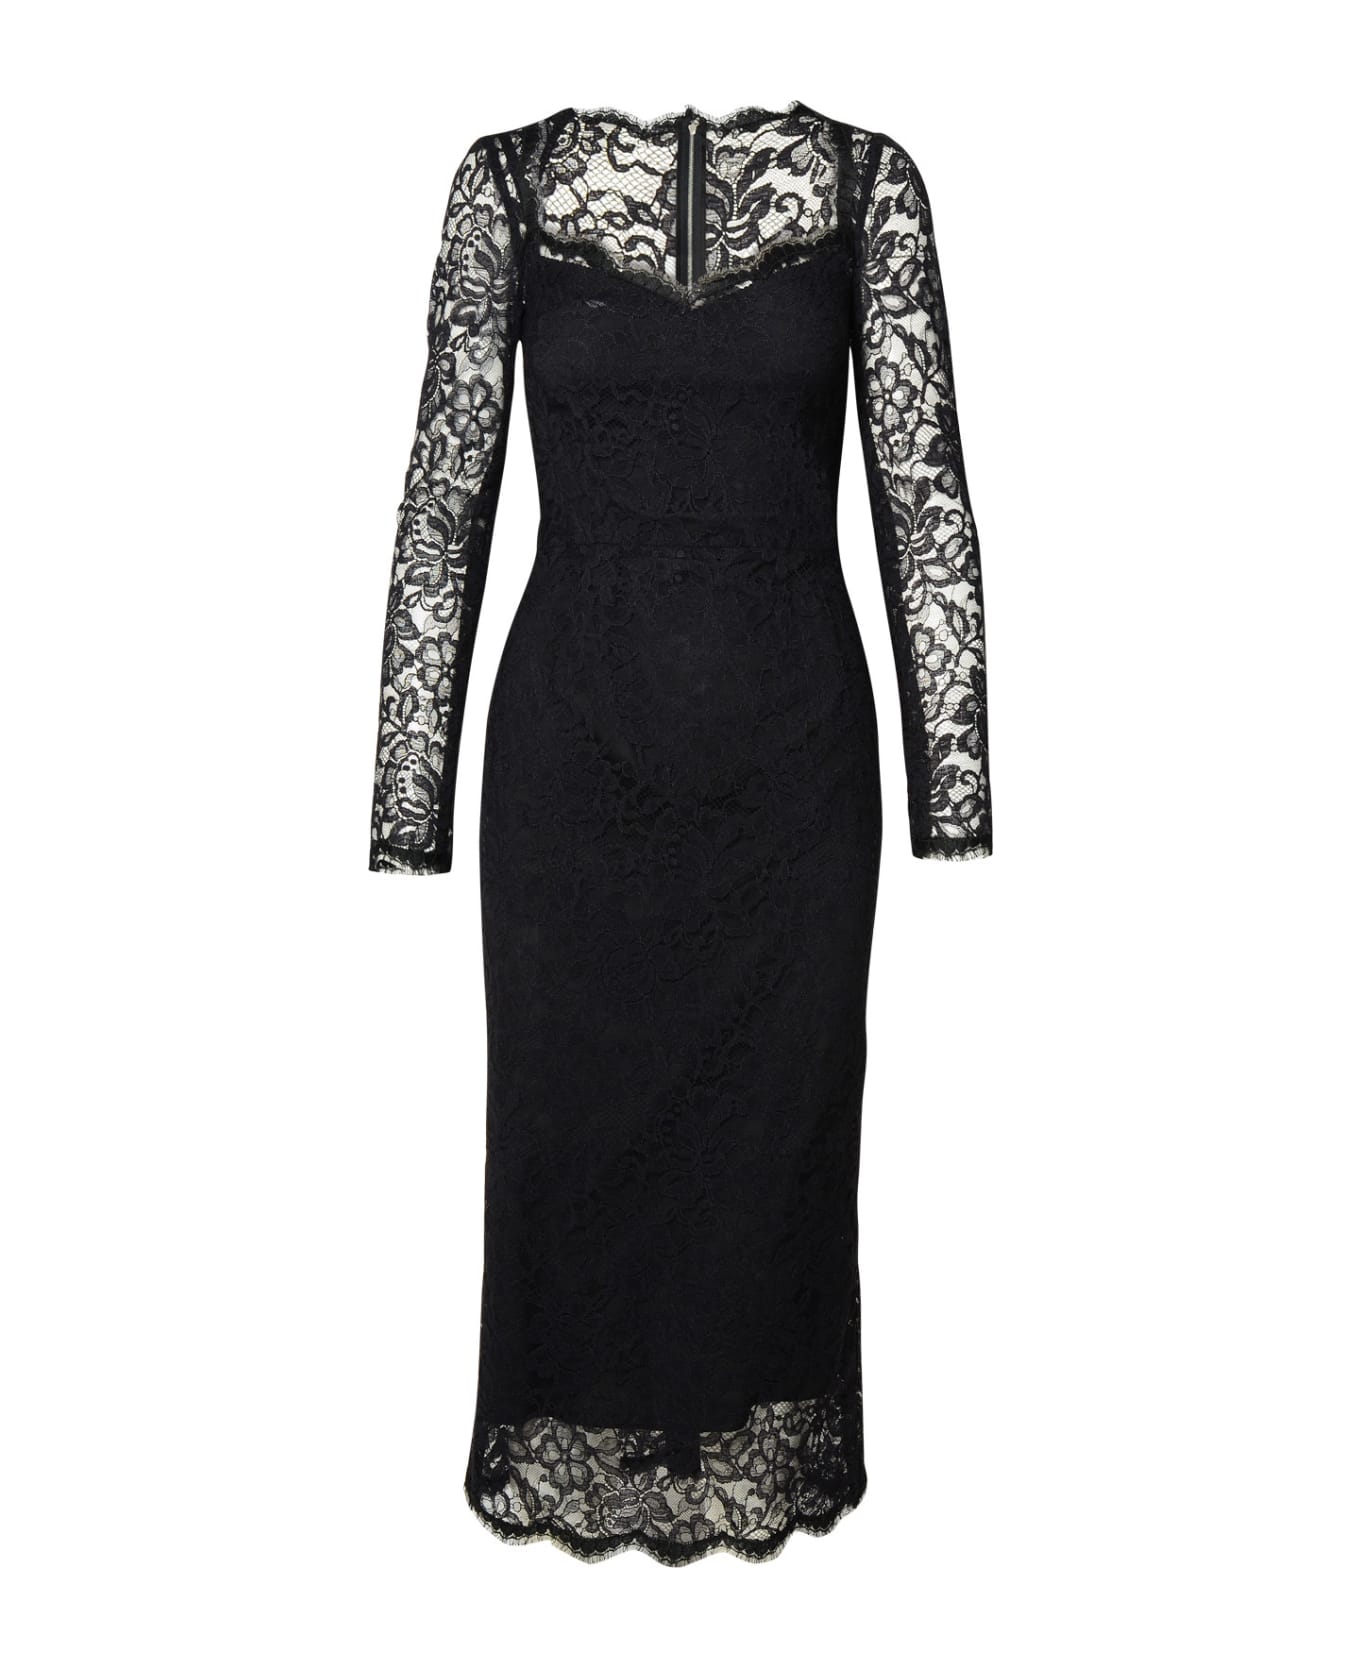 Dolce & Gabbana Midi Dress In Floral Chantilly Lace - Black ワンピース＆ドレス